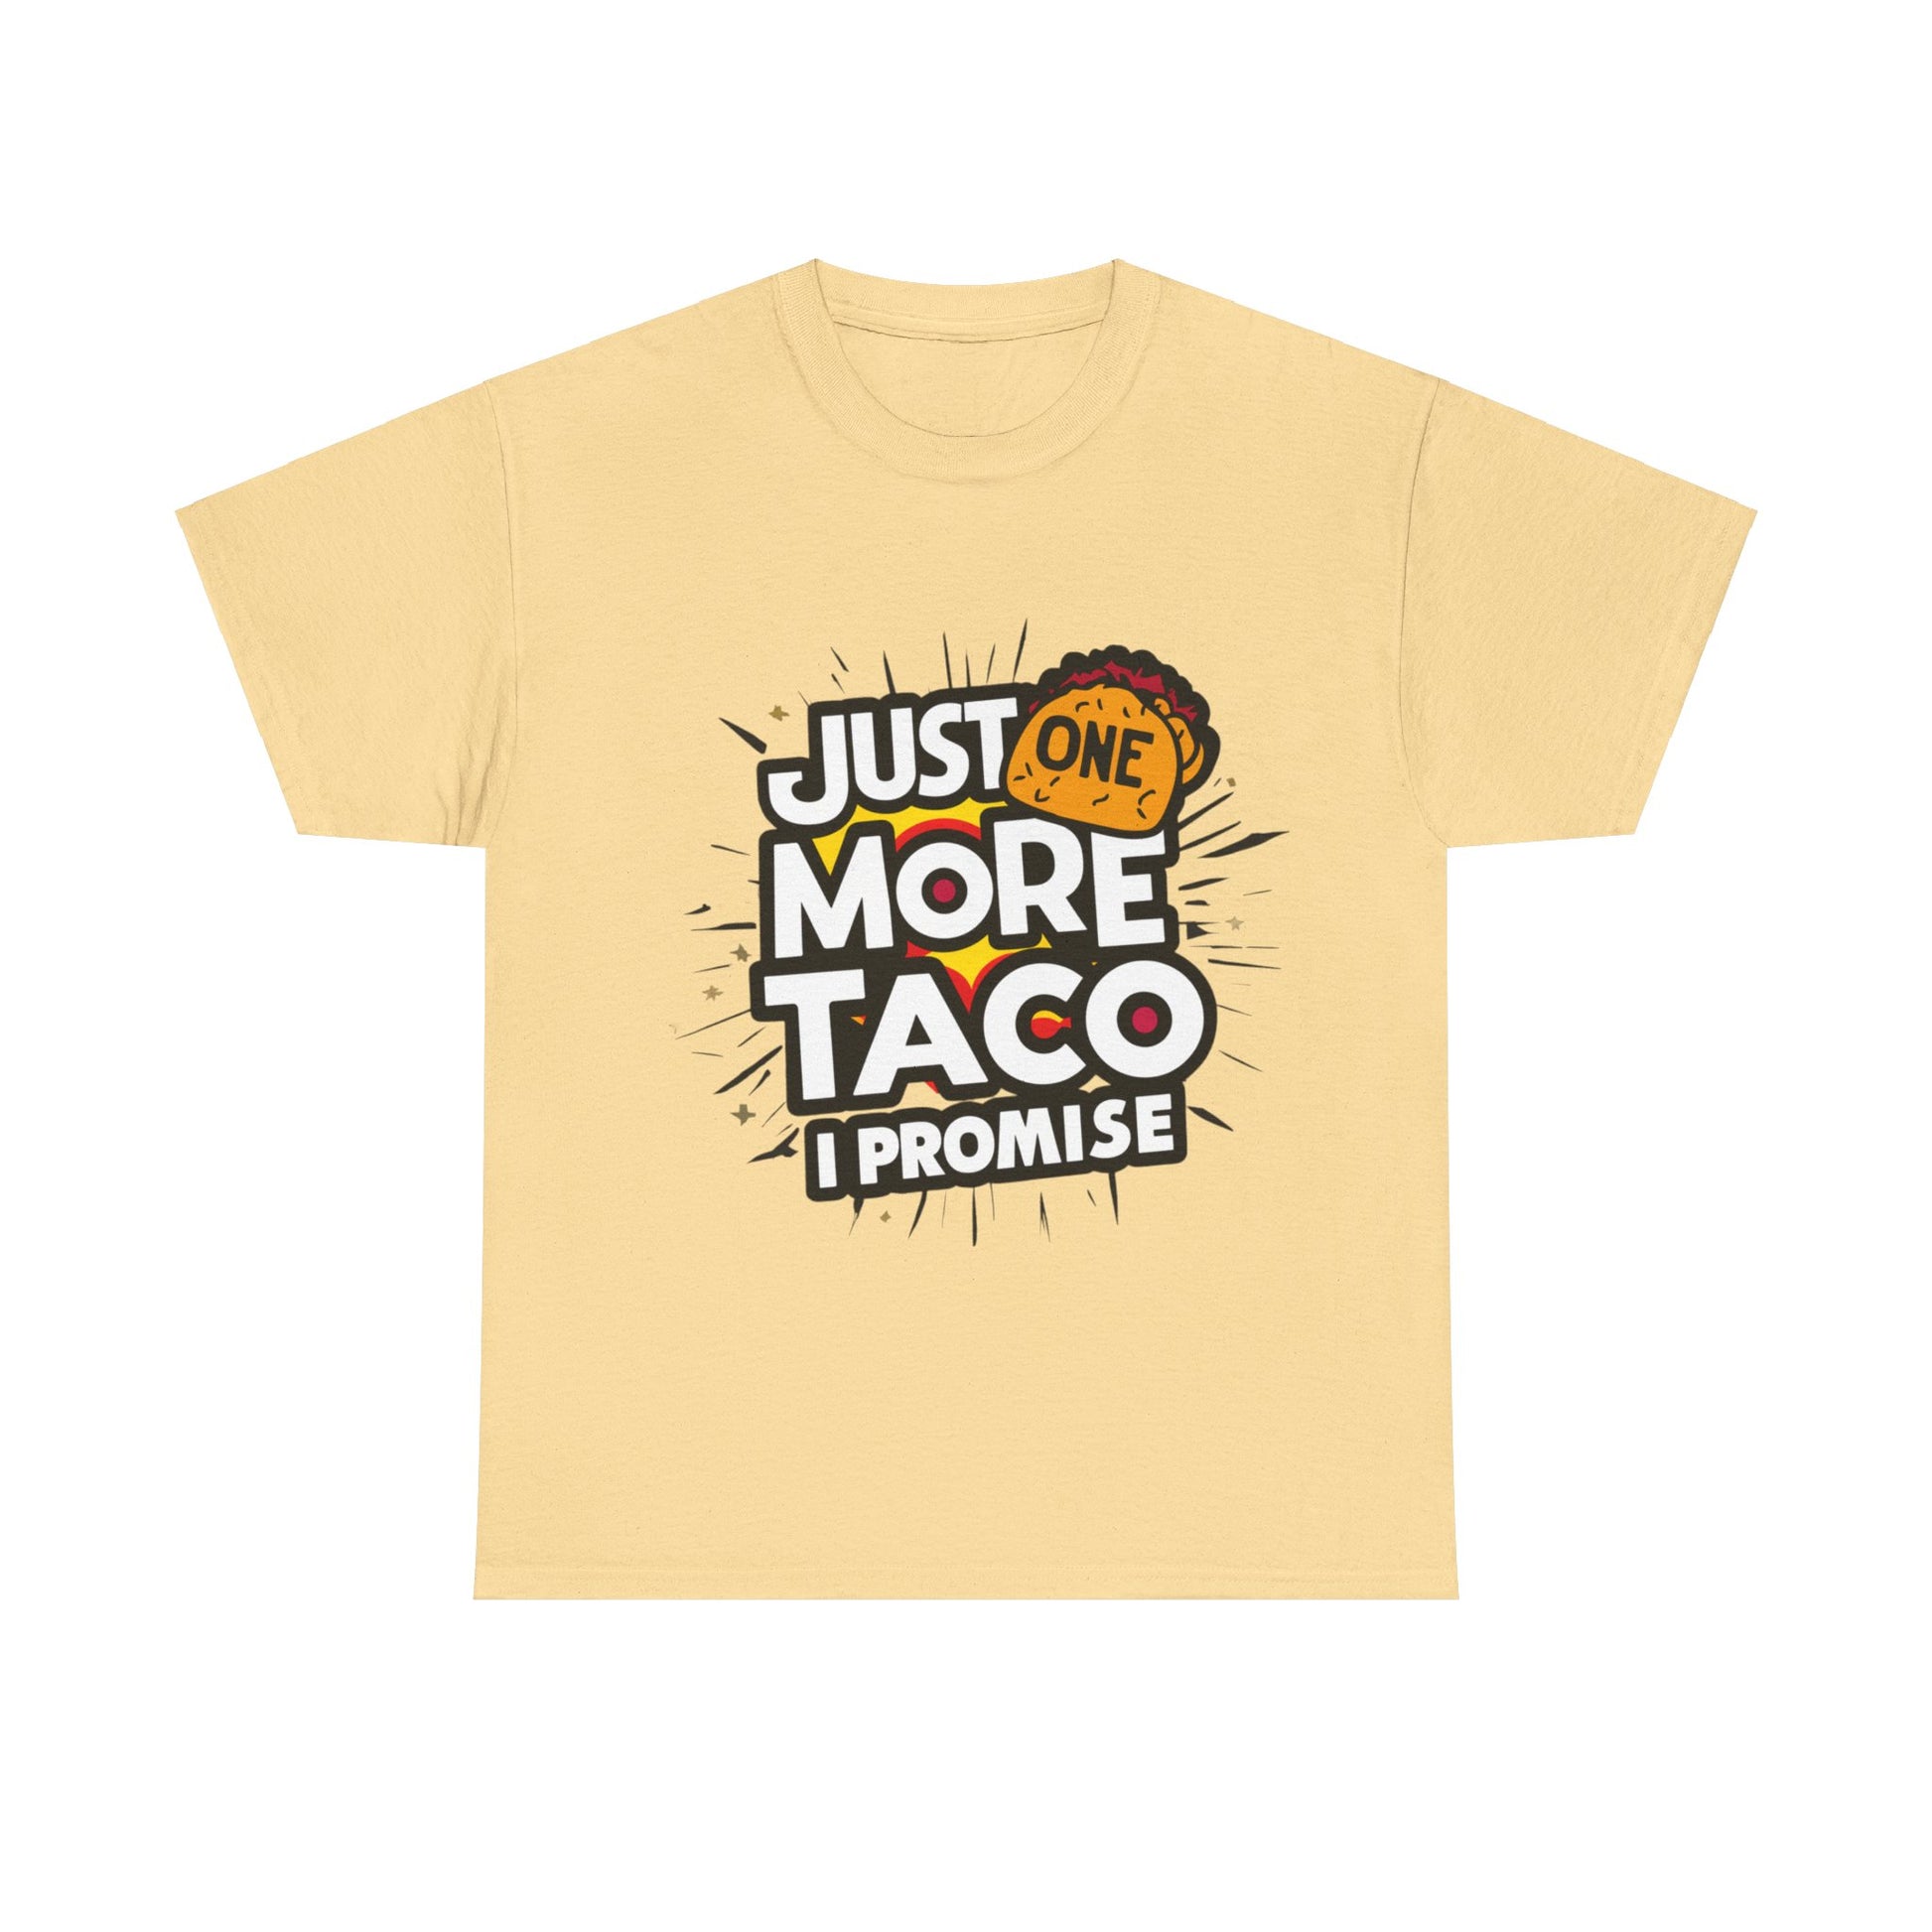 Copy of Just One More Taco I Promise Mexican Food Graphic Unisex Heavy Cotton Tee Cotton Funny Humorous Graphic Soft Premium Unisex Men Women Yellow Haze T-shirt Birthday Gift-11